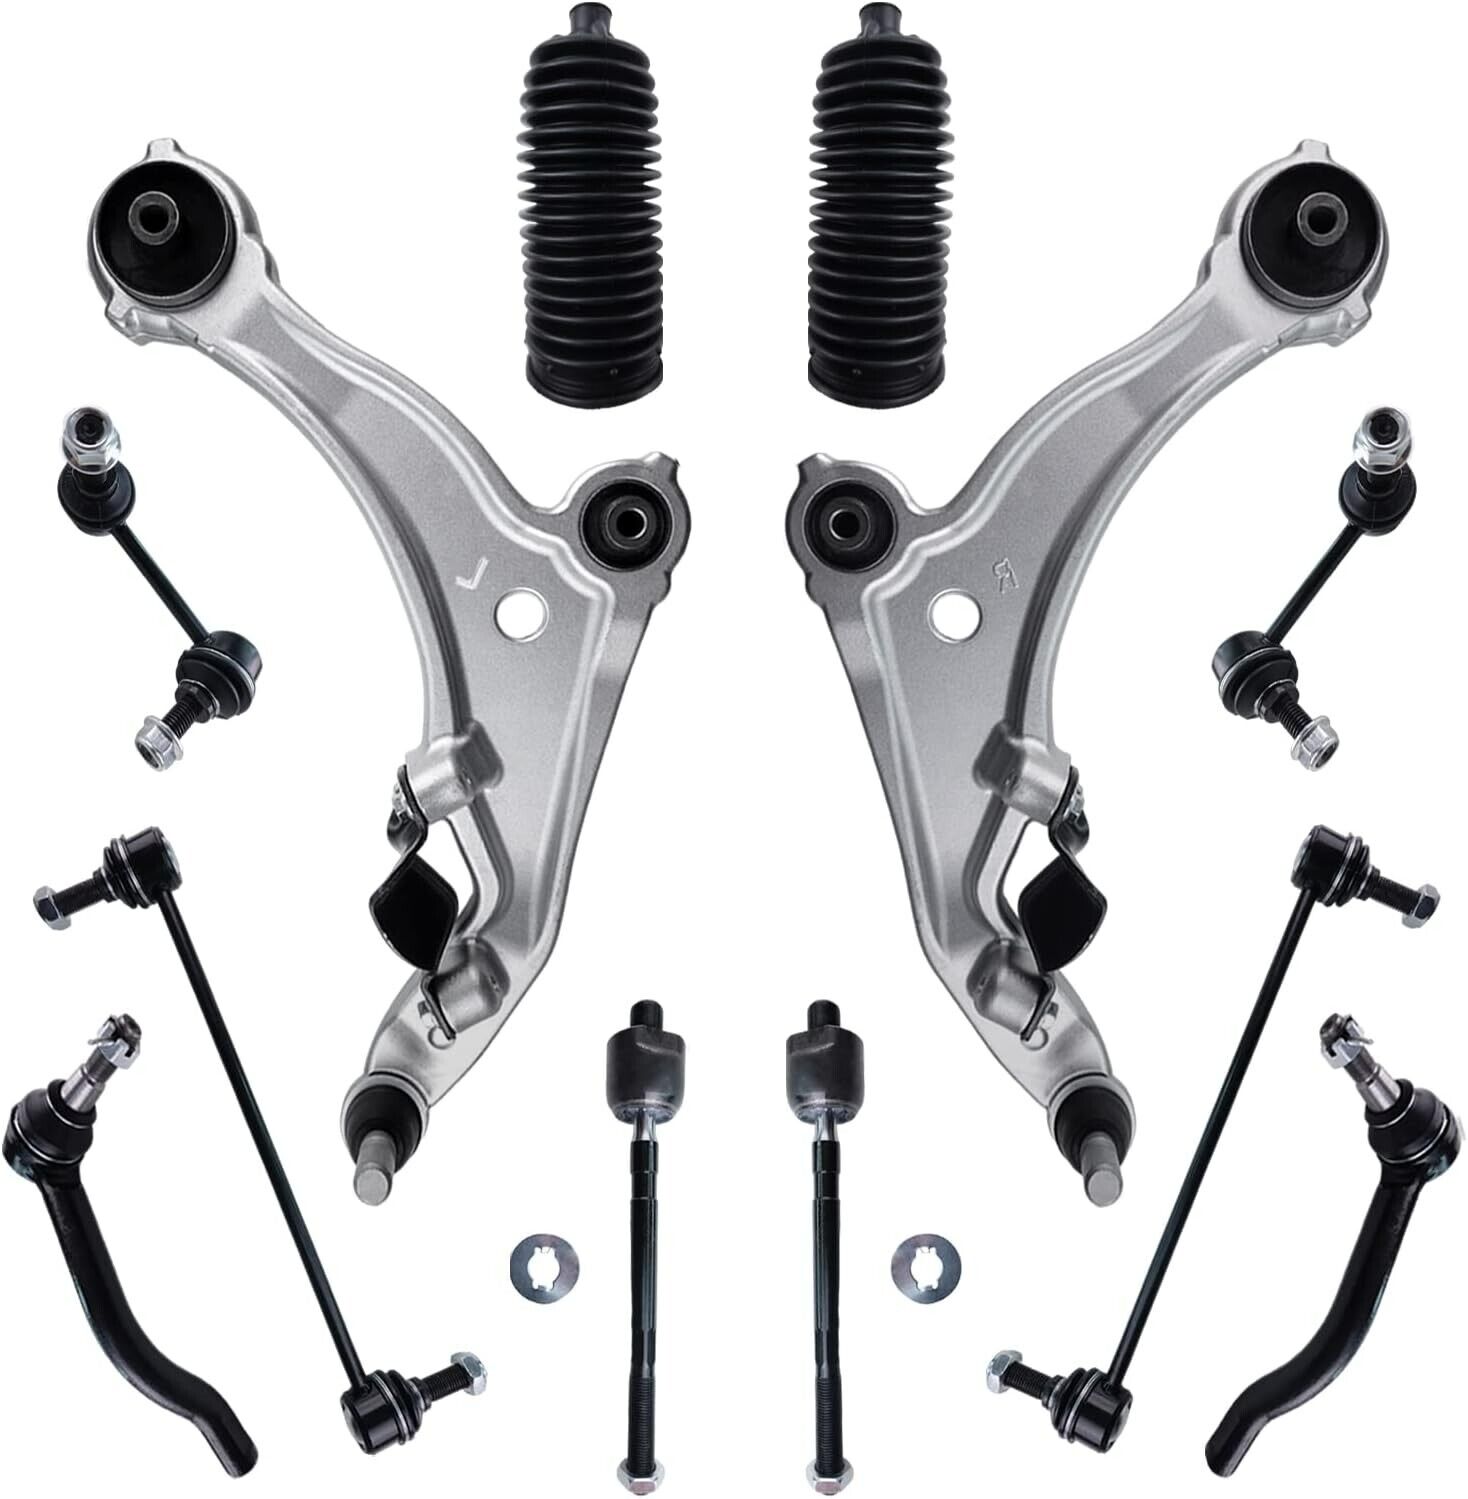 SVENSTAG Control Arm Kit With Sway Bar Links for 2009-2014 Nissan Maxima - 12Pcs